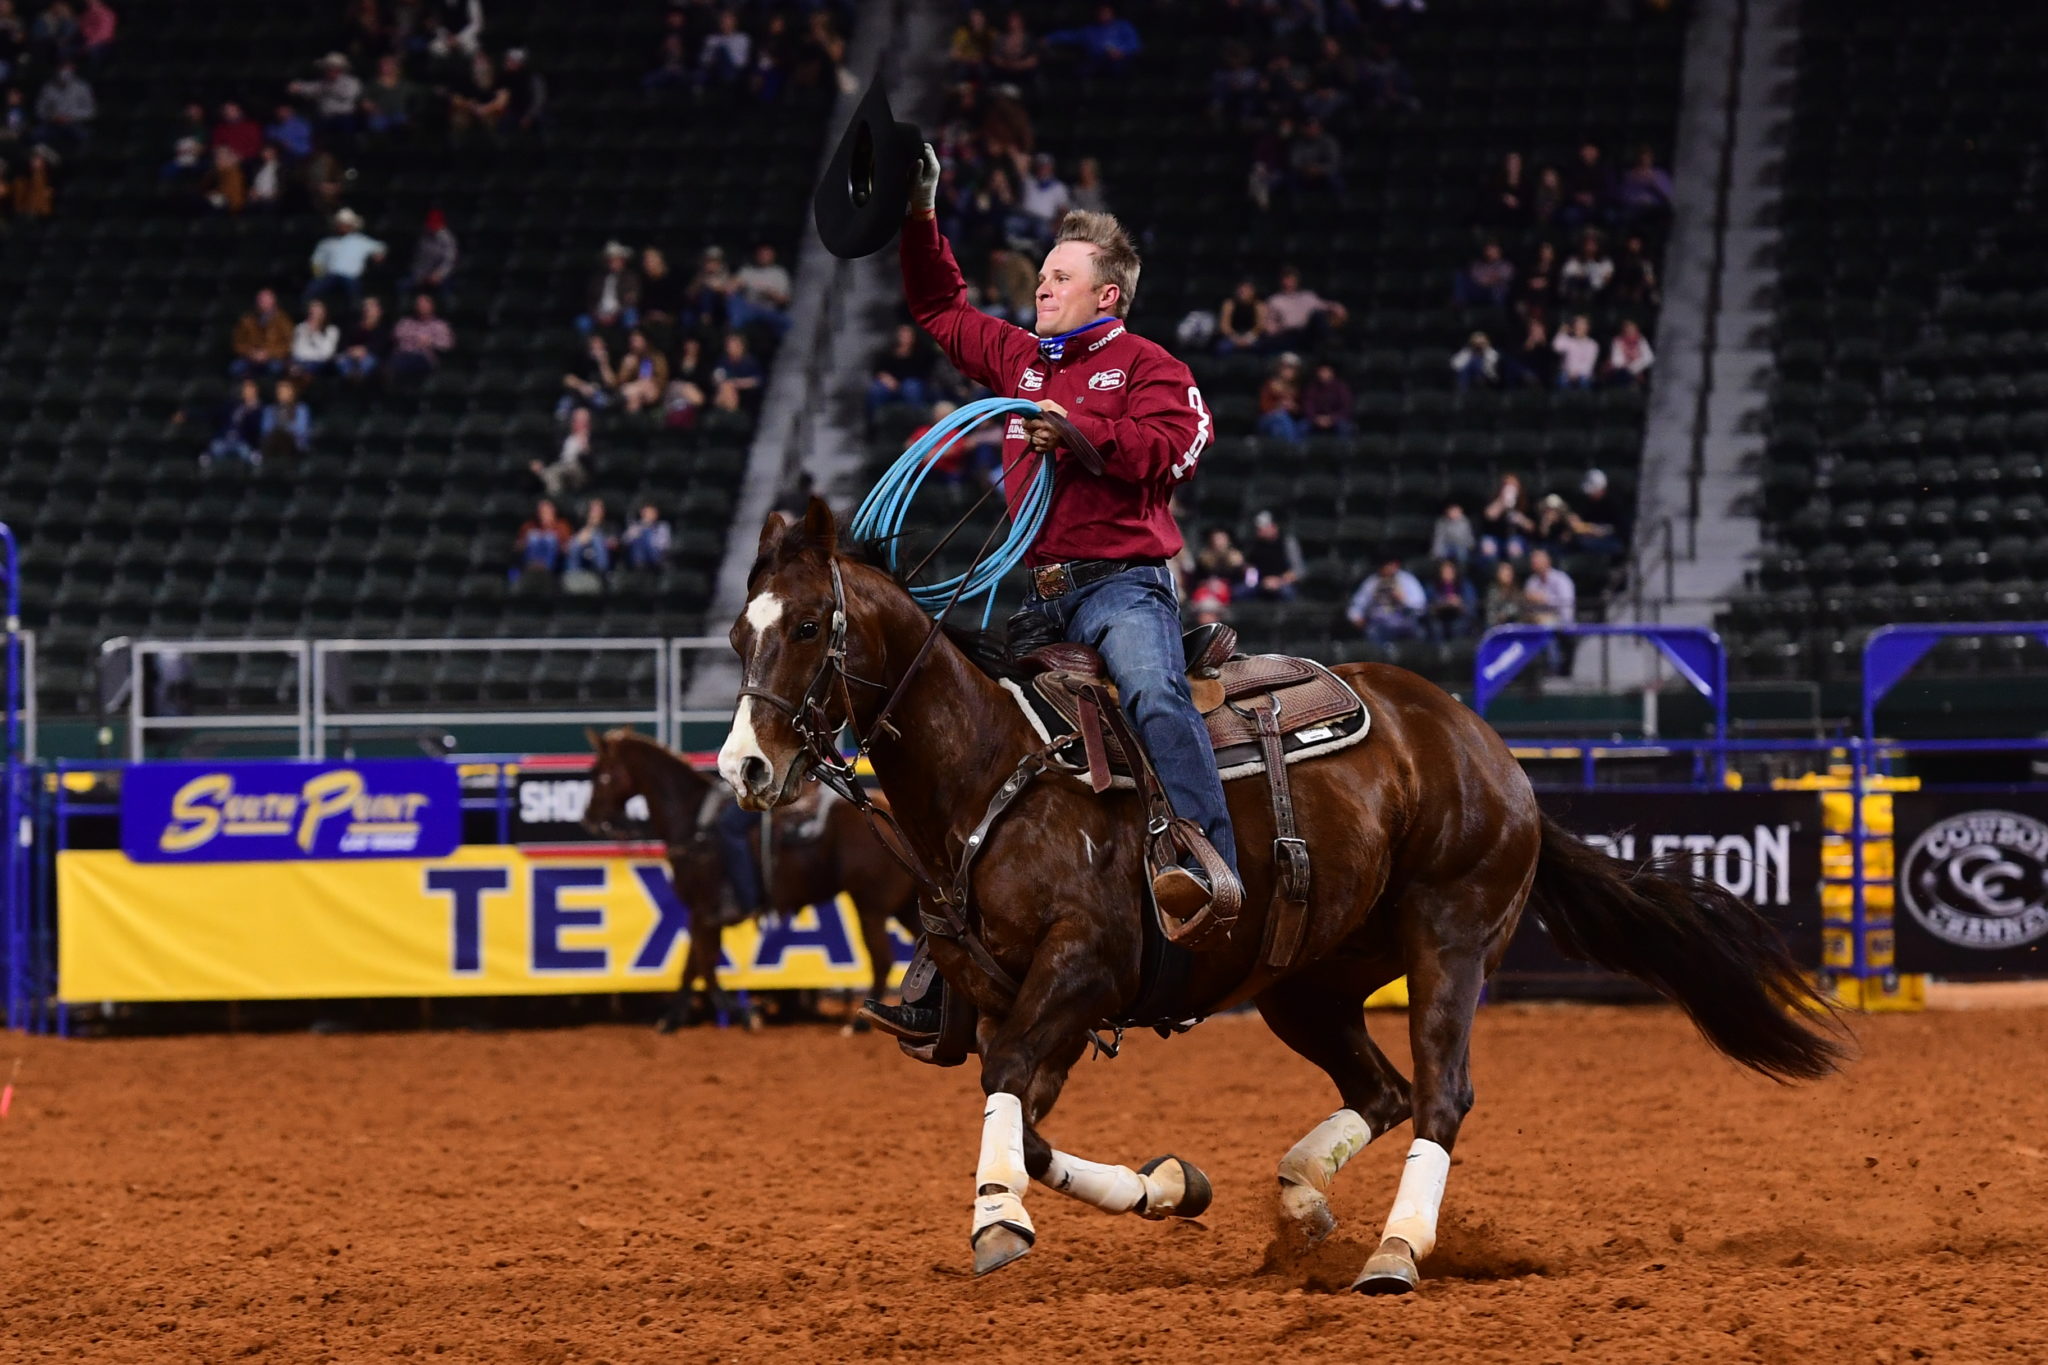 Team Ropers Battle for Top 15 Position in Final Pro Rodeo Weekend